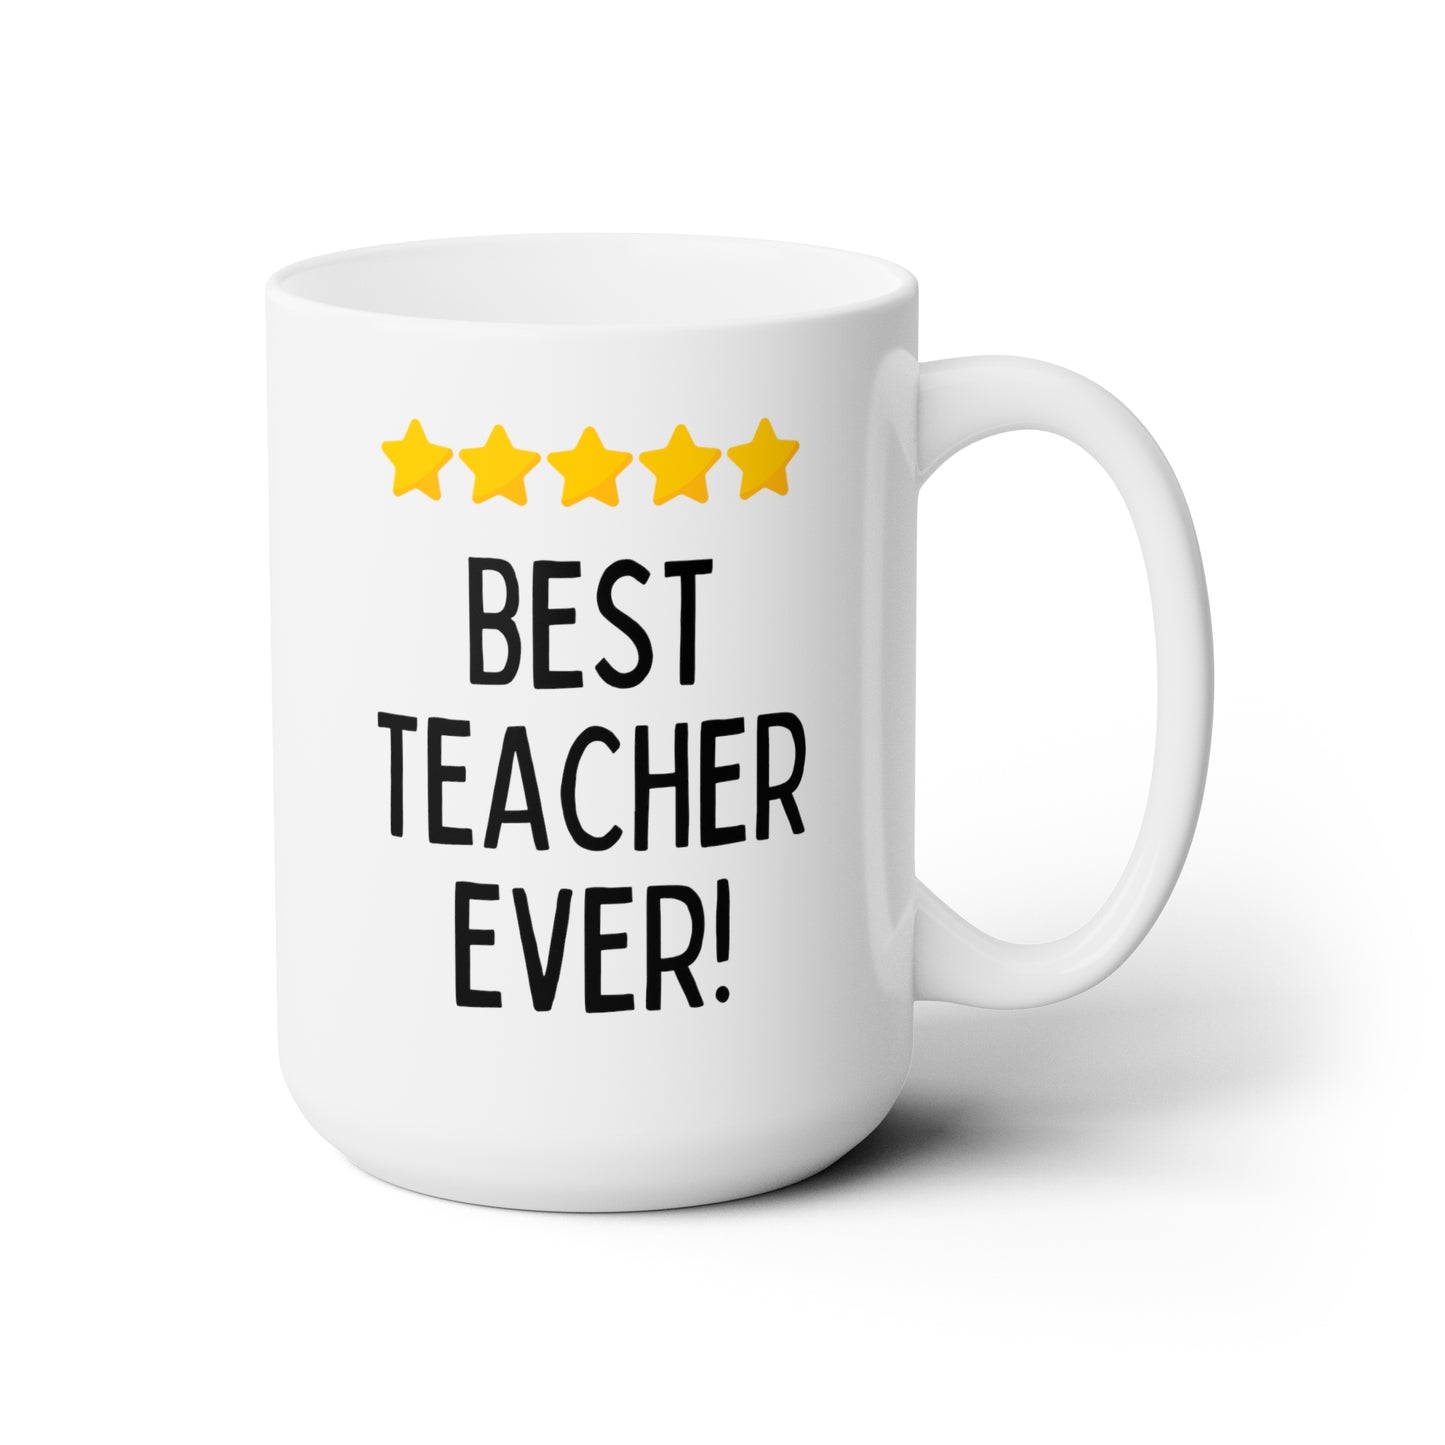 Best Teacher Ever 15oz white funny large coffee mug gift for educator teaching assistant end of the year present professor tutor five stars waveywares wavey wares wavywares wavy wares